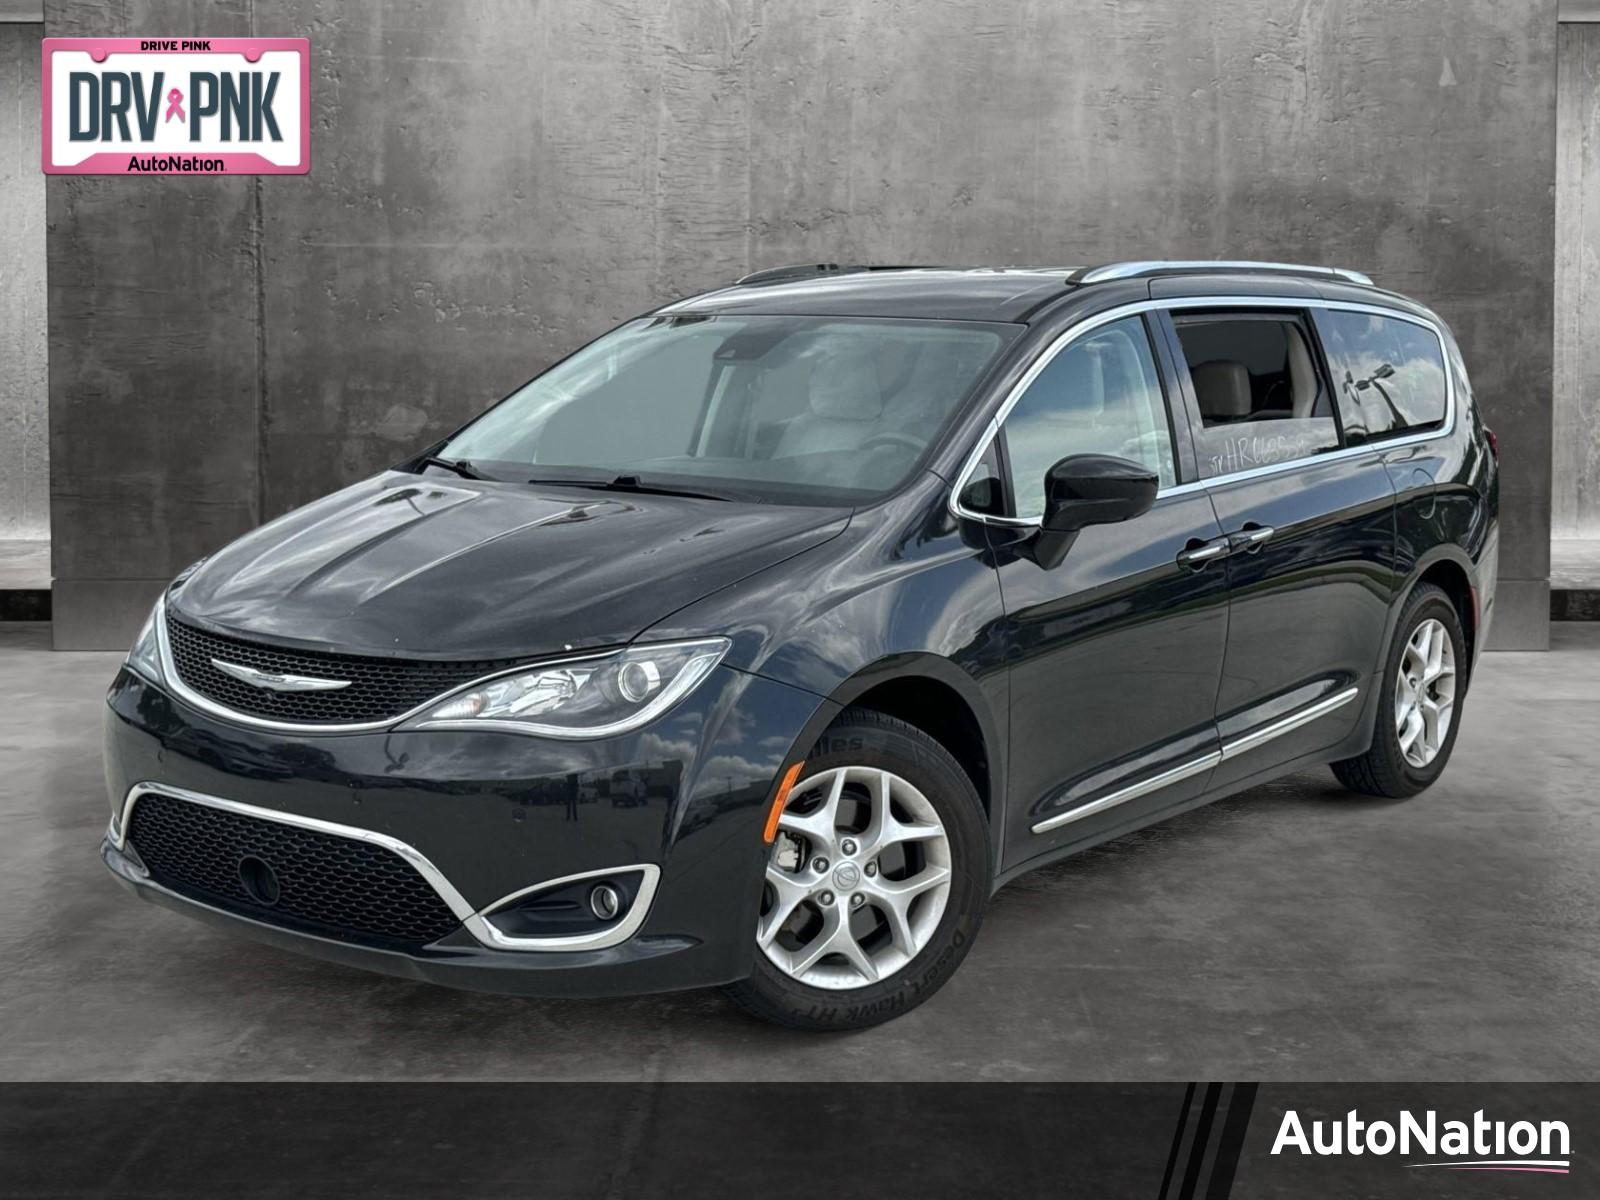 2017 Chrysler Pacifica Vehicle Photo in Pembroke Pines, FL 33027